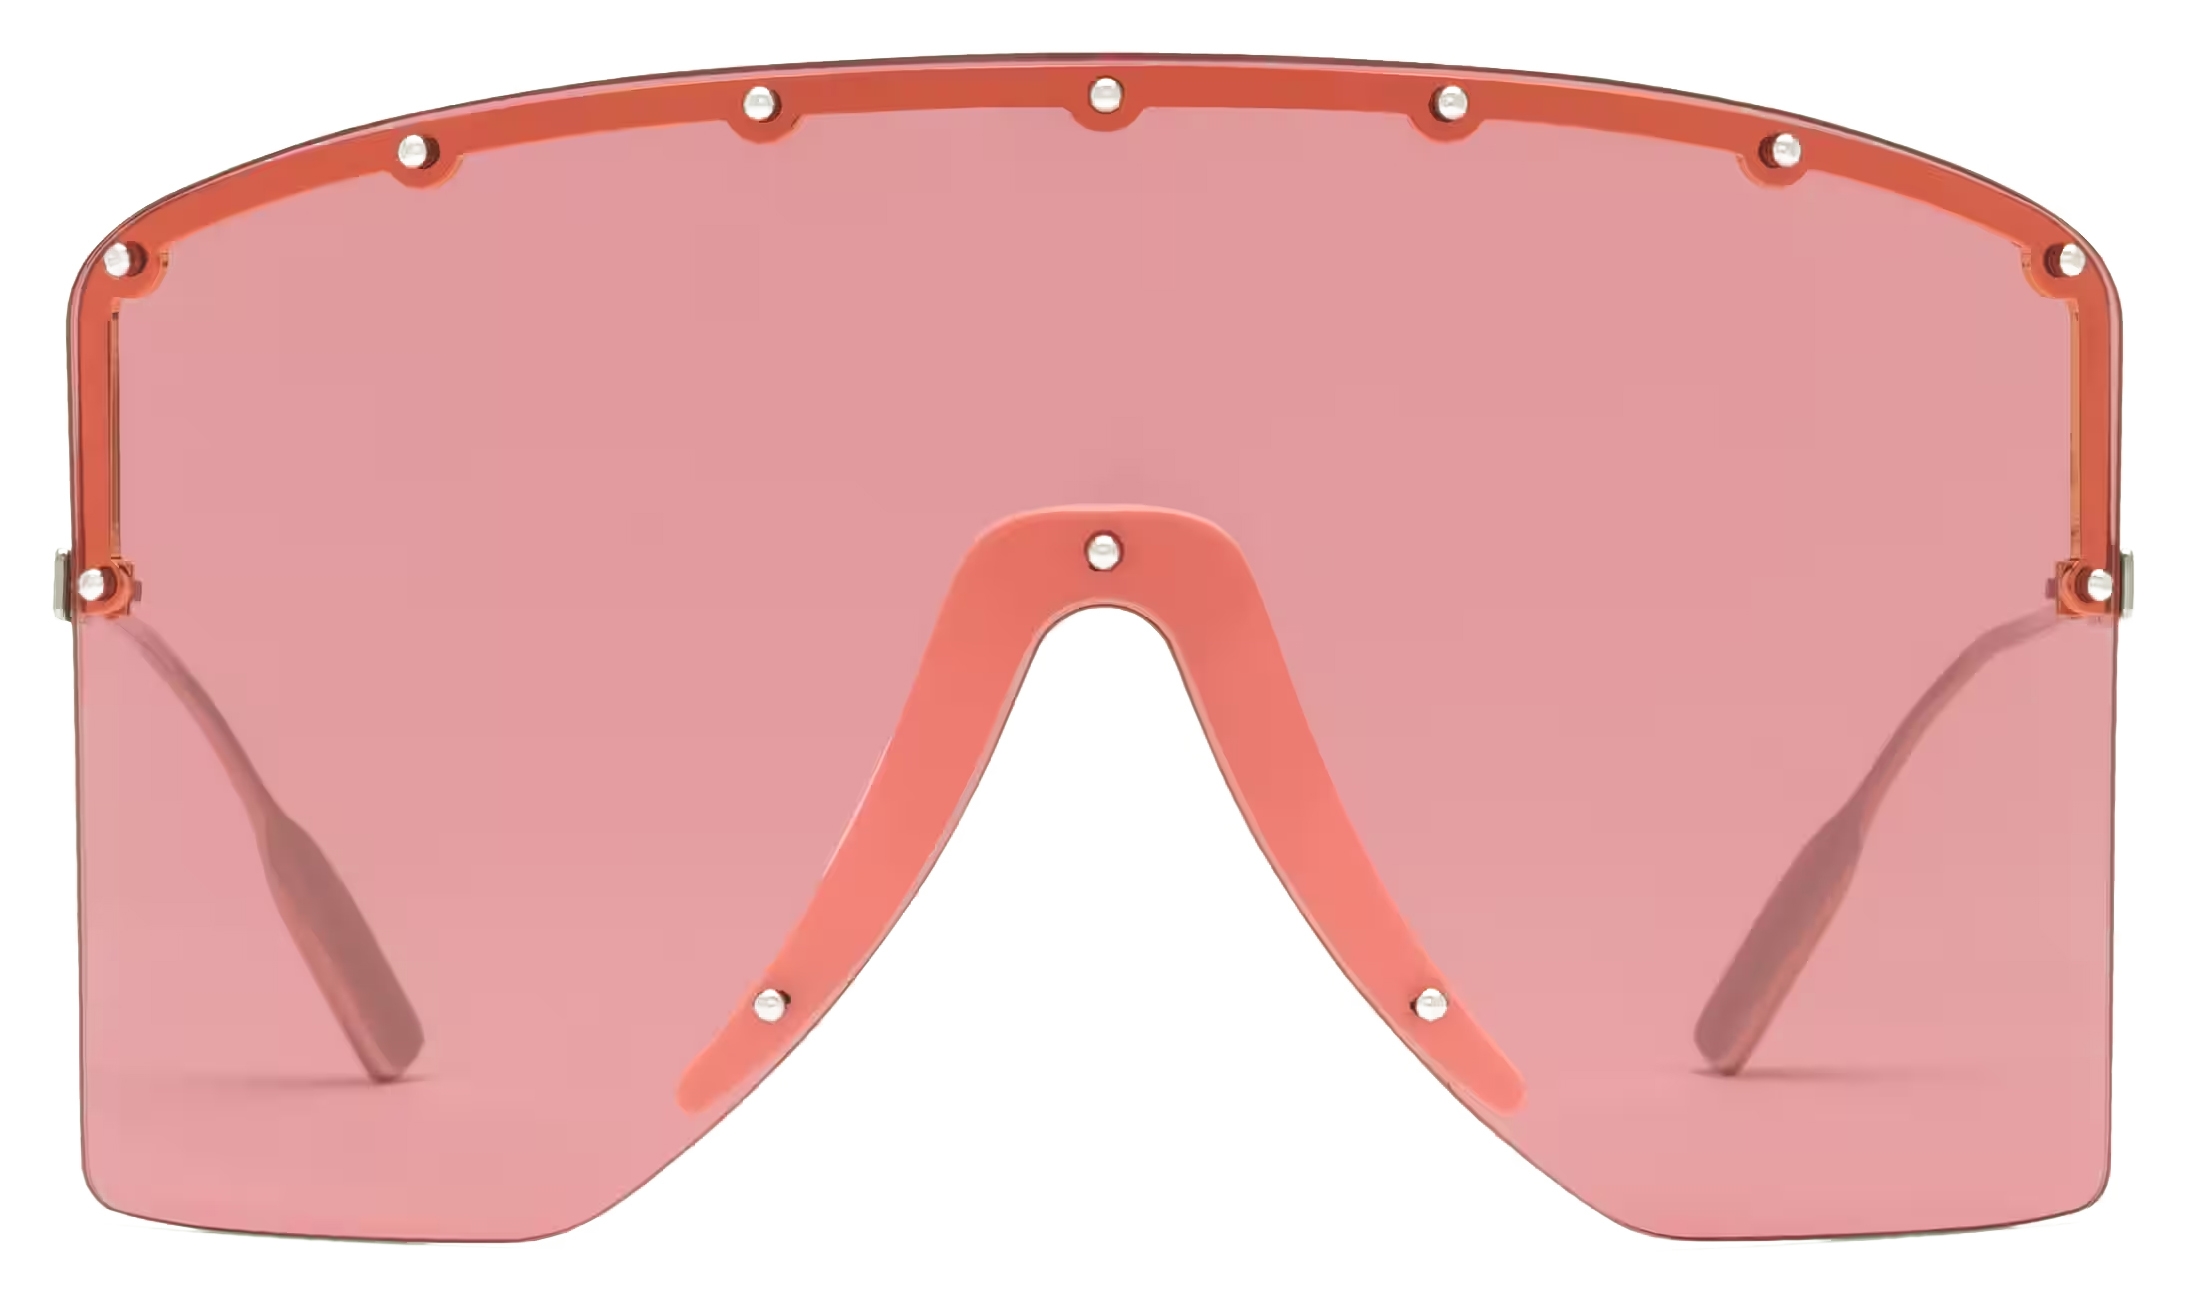 Gucci - Square Sunglasses with Optimal Fit - Pink - Gucci Eyewear - Avvenice